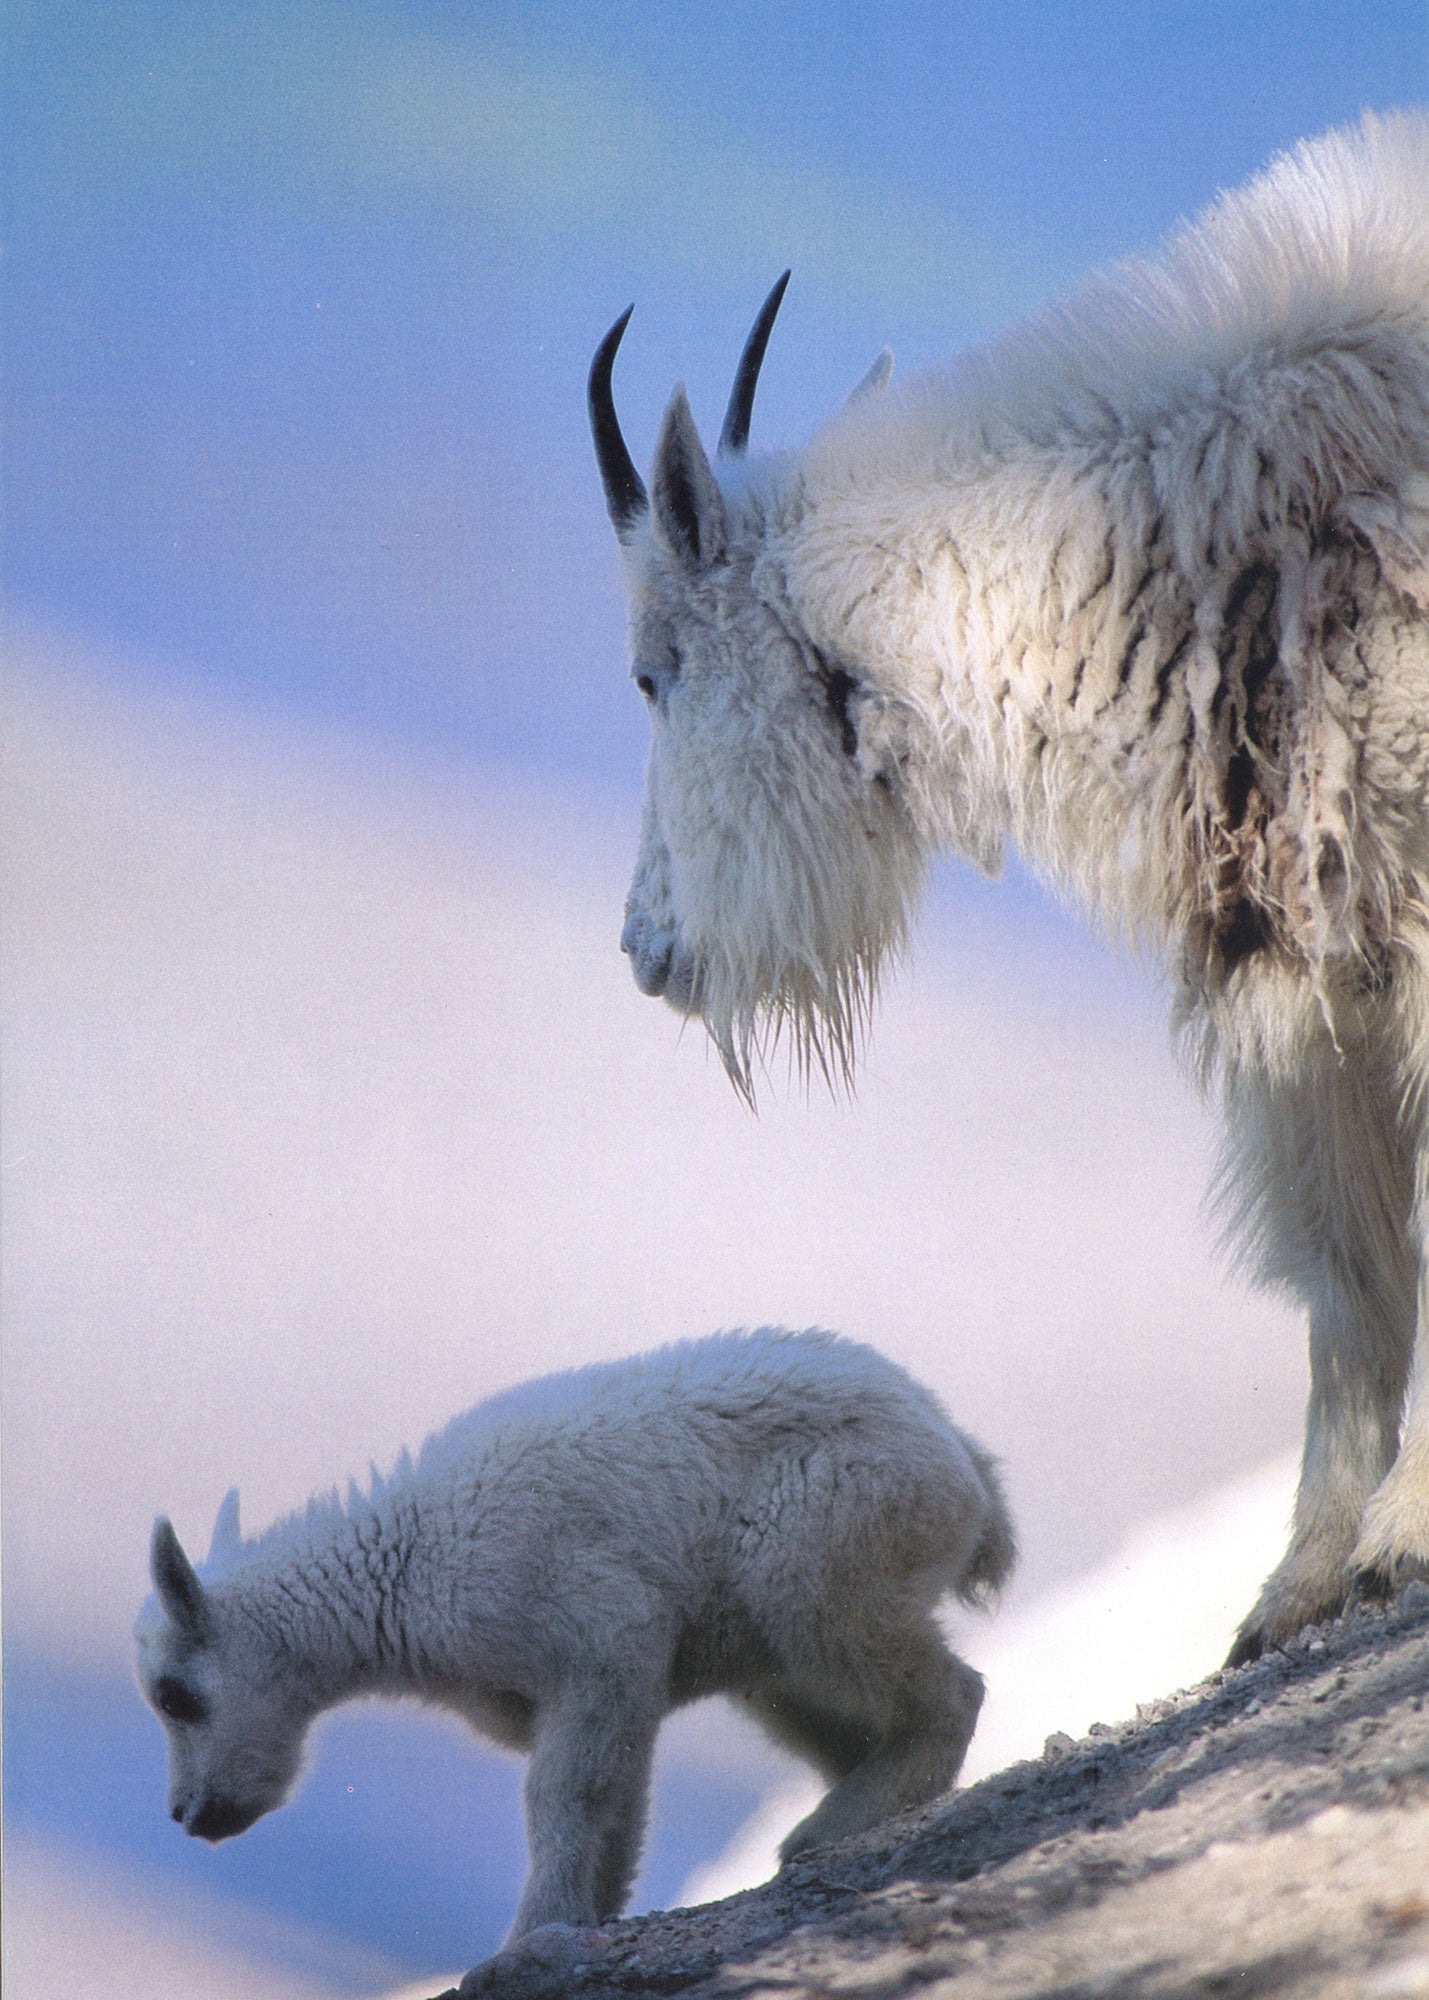 A mountain goat with its baby. End of image description.